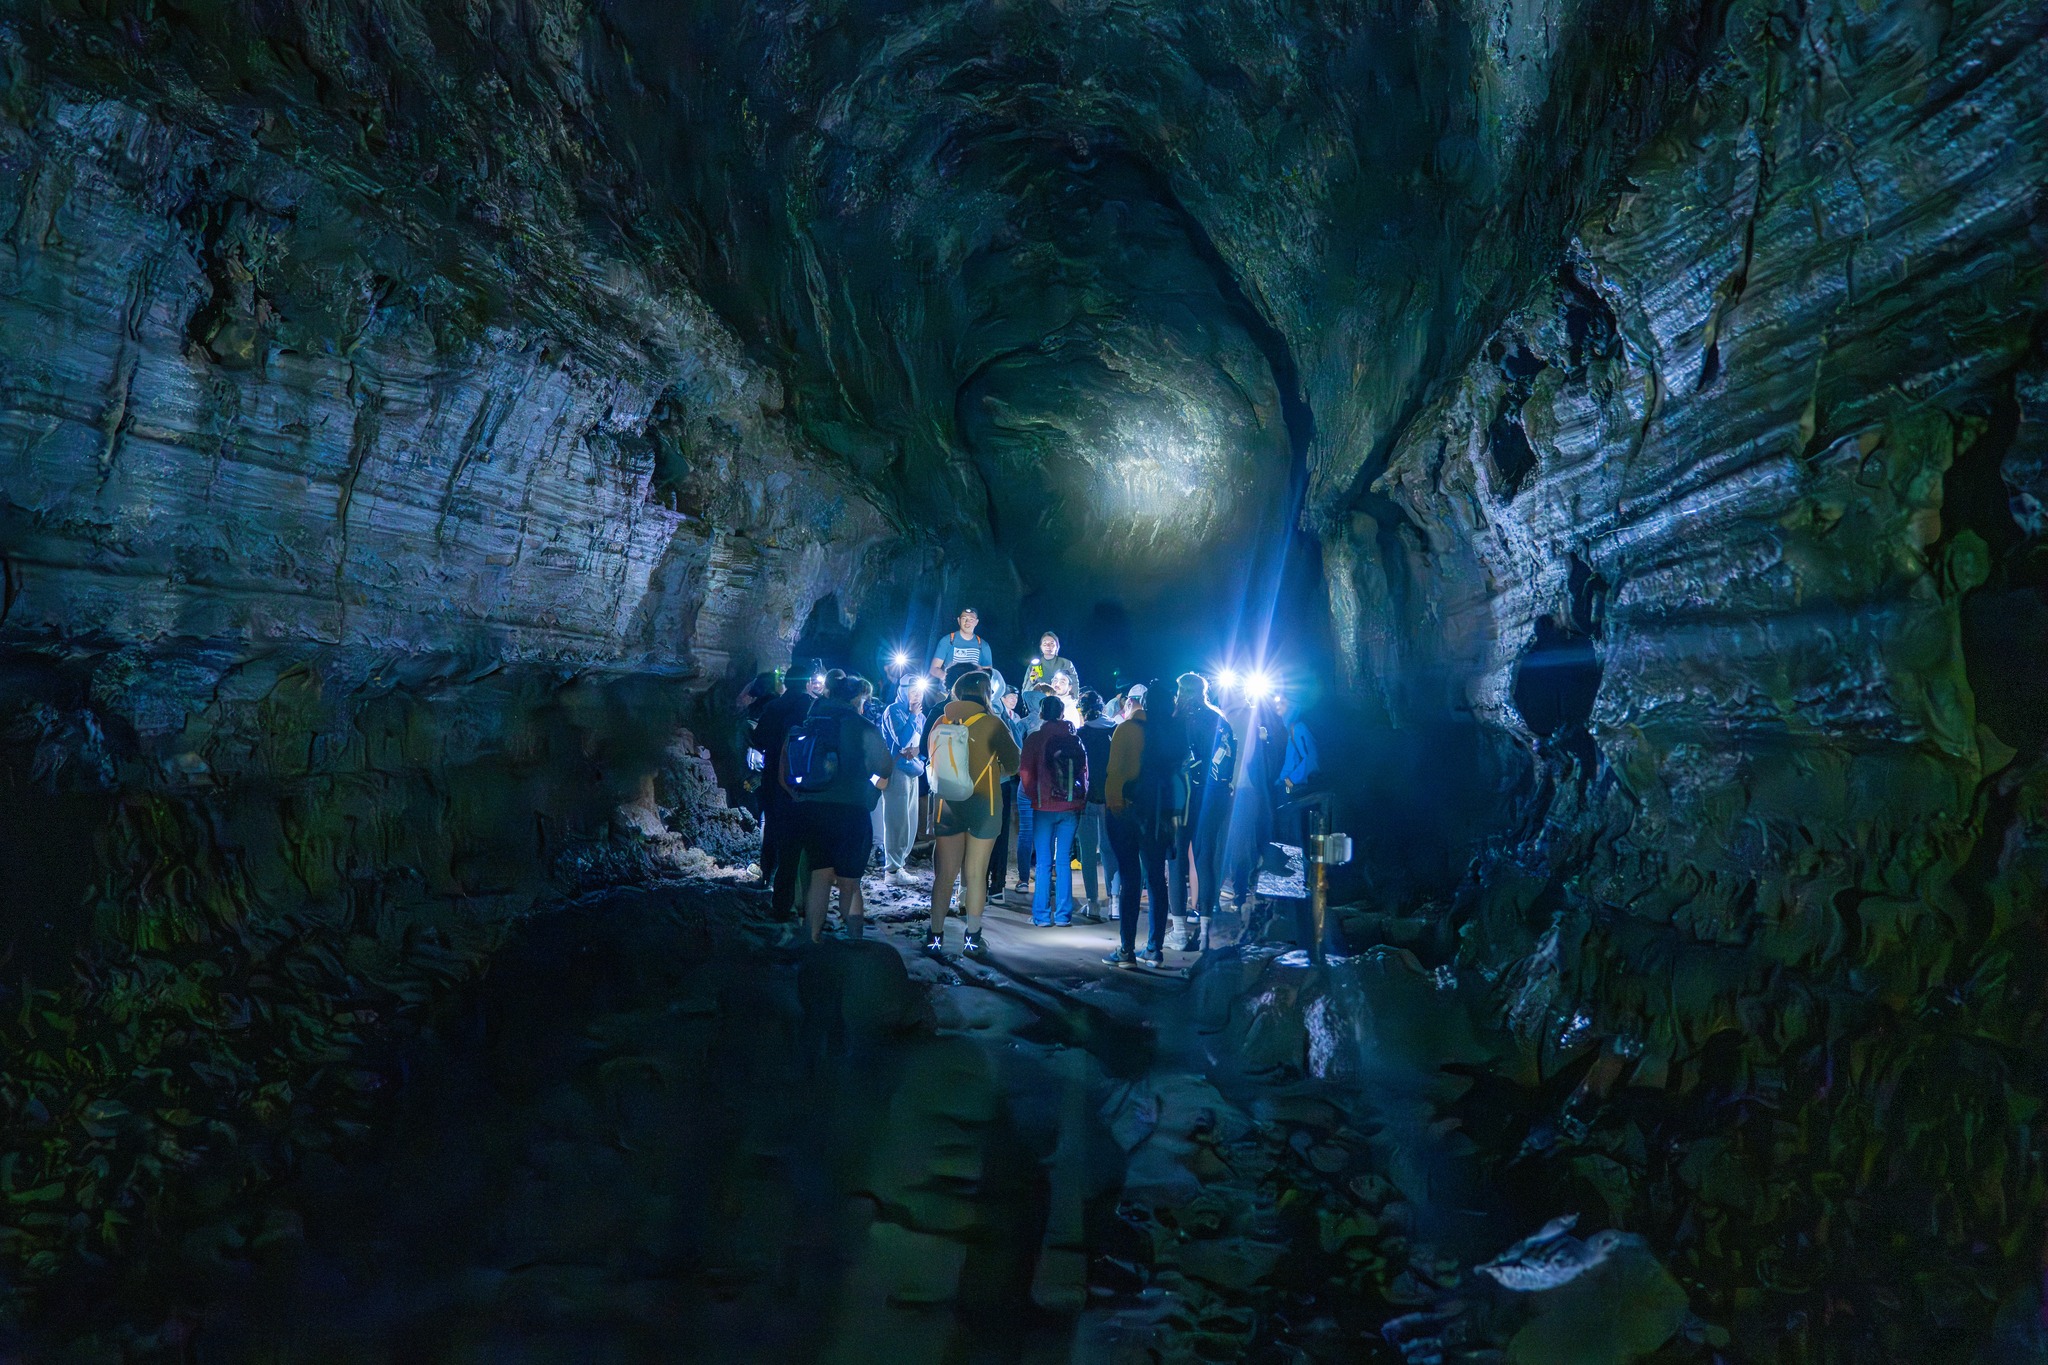 students in a dark cave with headlamps